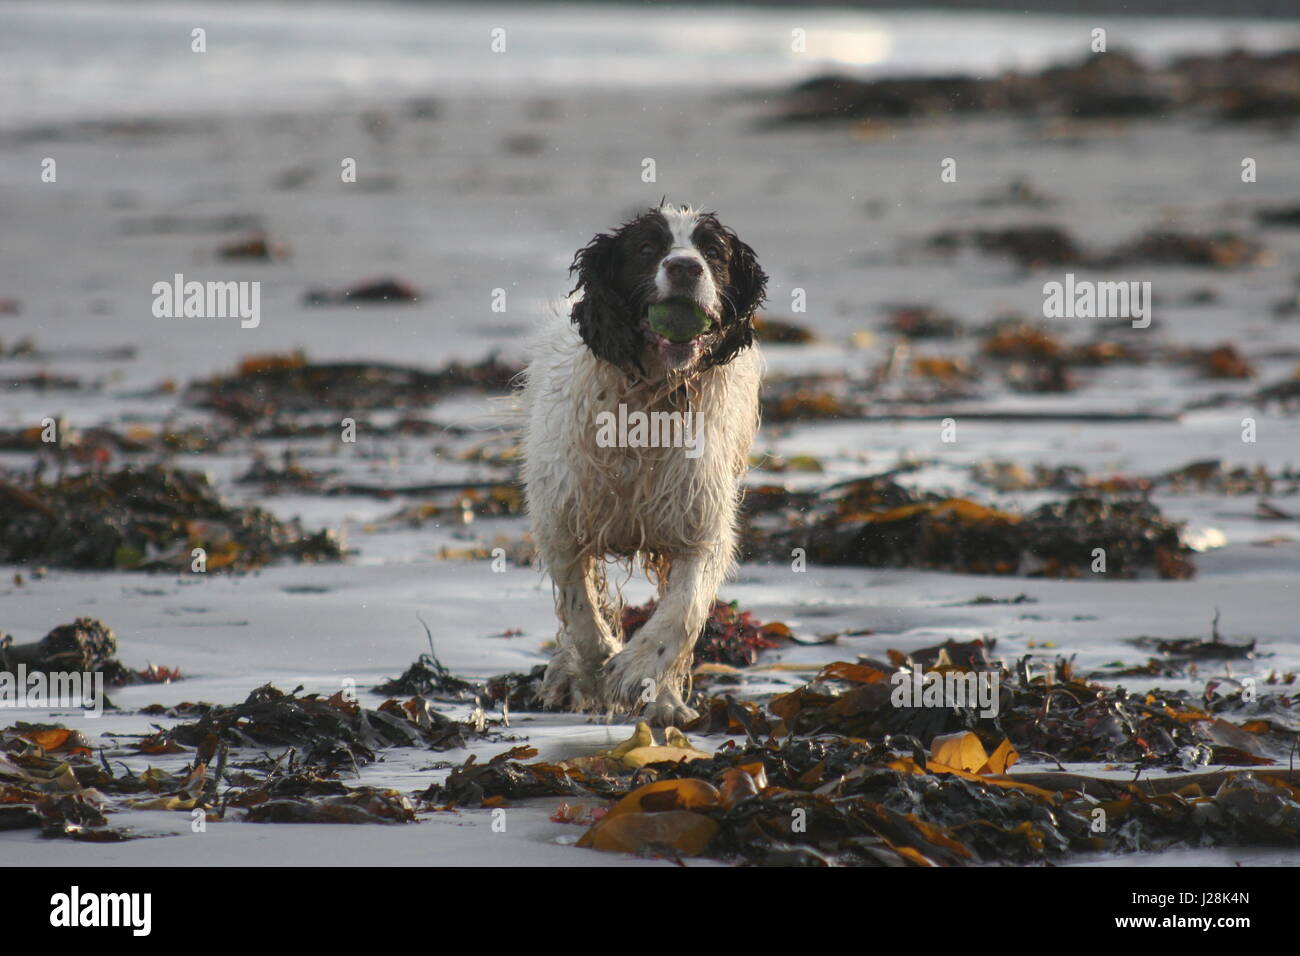 Brown & white English Springer Spaniel Creggy crosses a beach near Millisle Co Down N Ireland UK after recovering a thrown ball Stock Photo